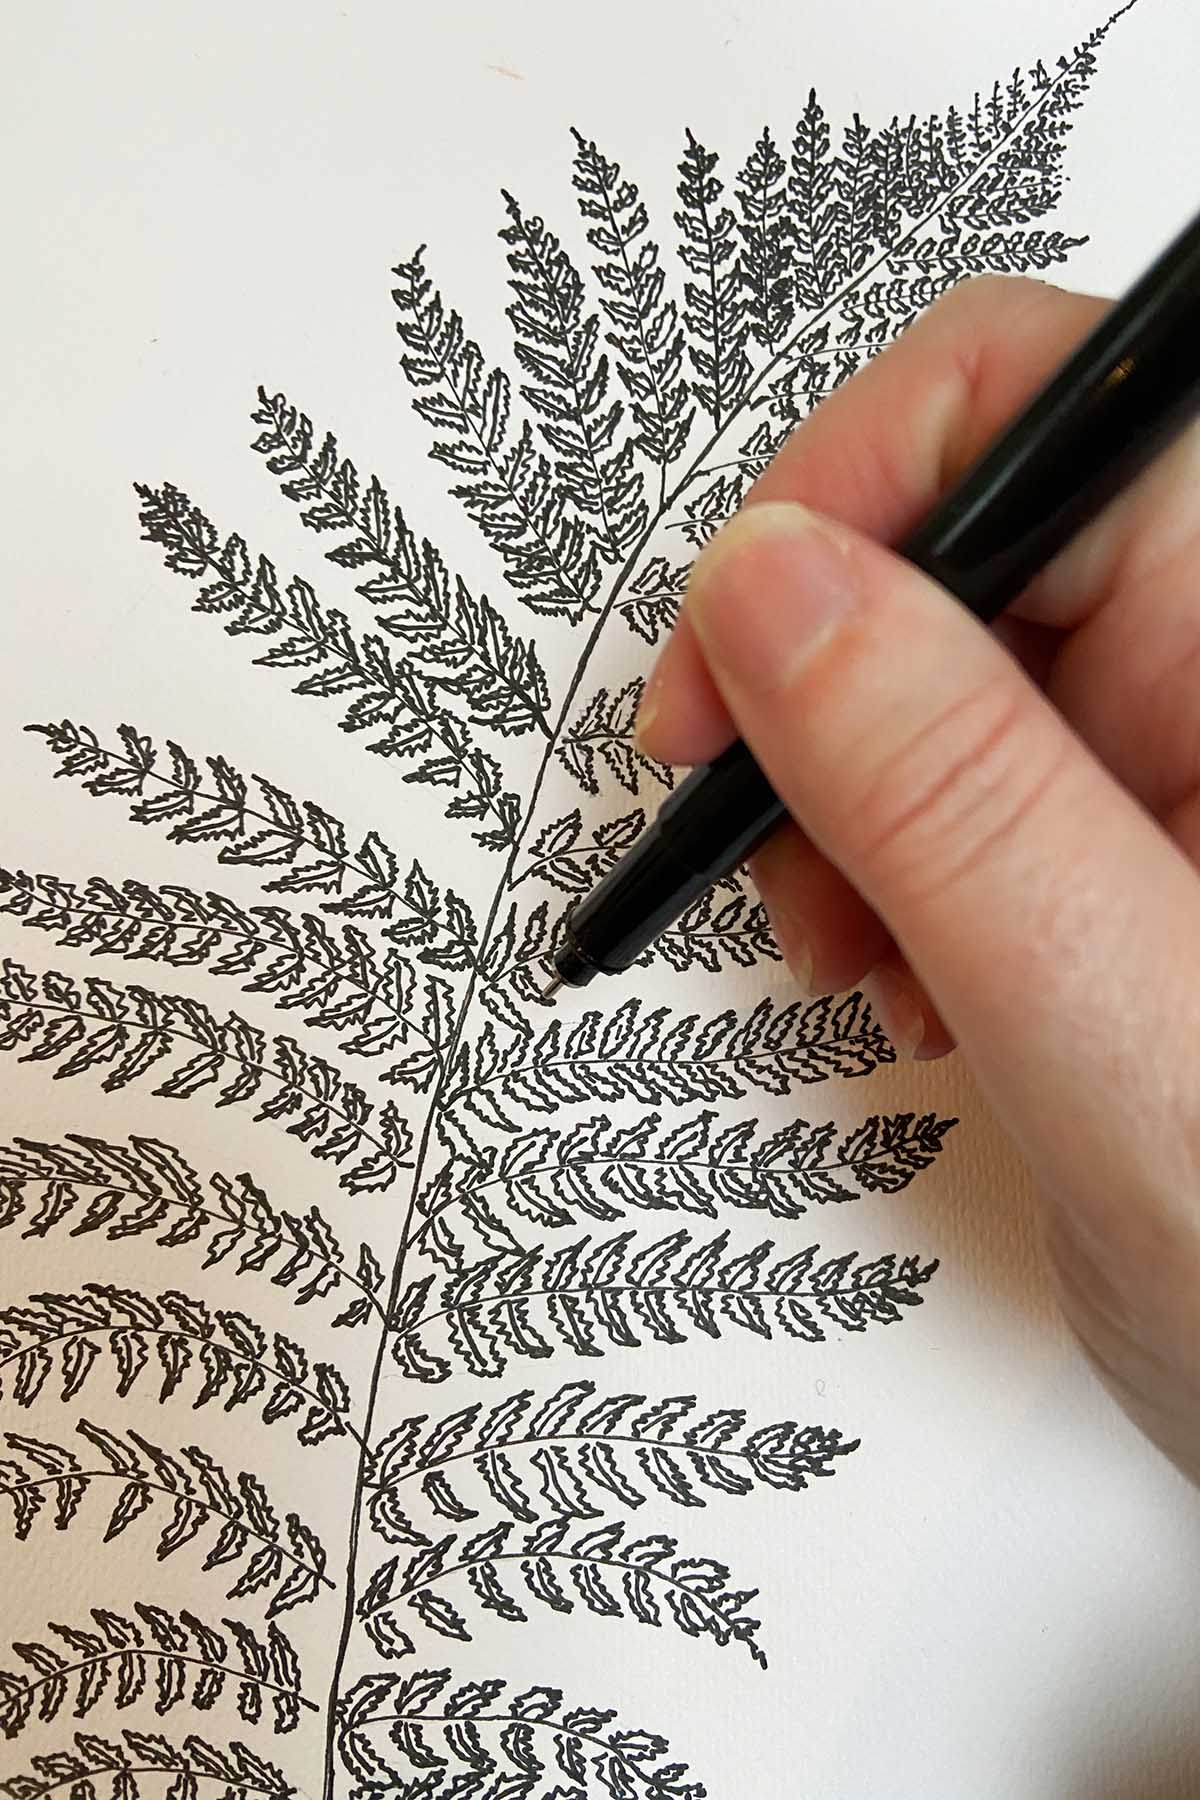 drawing the fonds of a fern with a pen